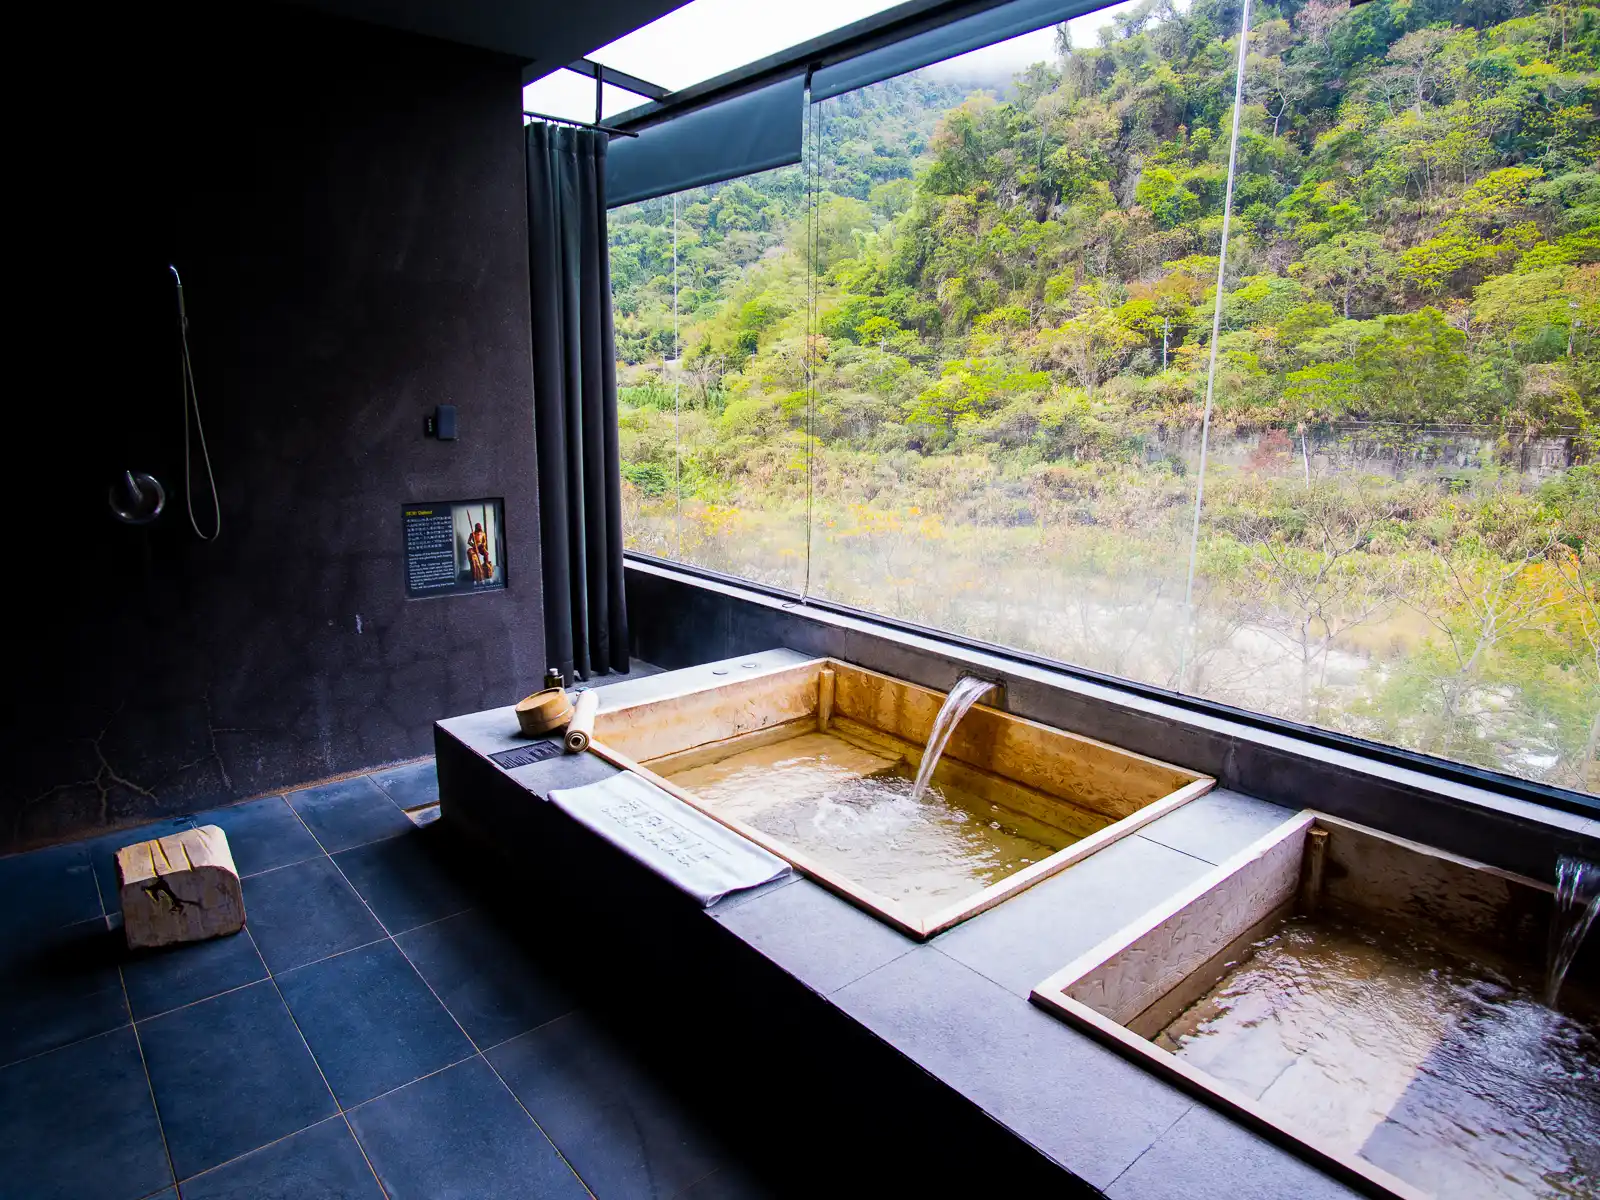 A private indoor hot spring features a view of the river valley below.